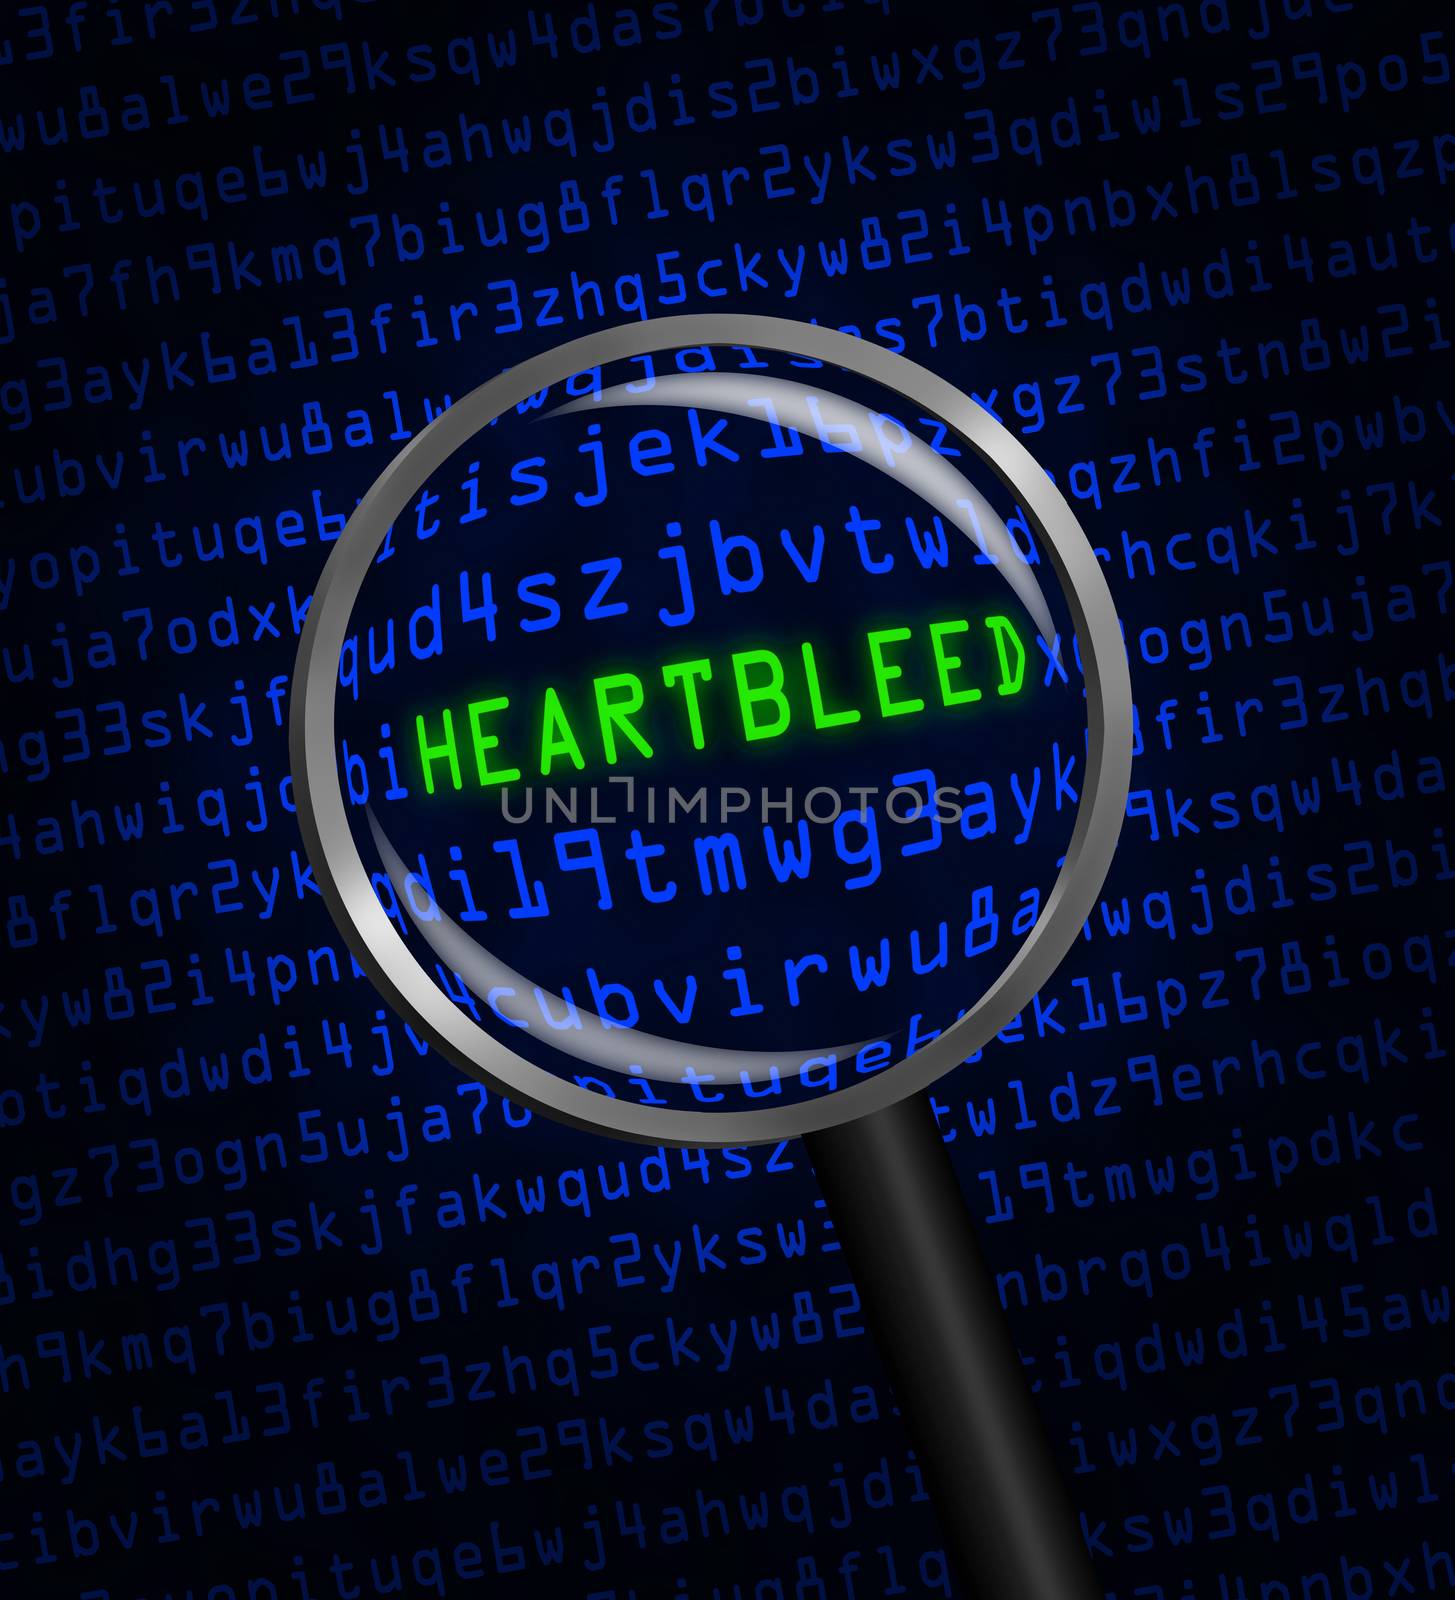 Heartbleed revealed in computer code through a magnifying glass  by Balefire9